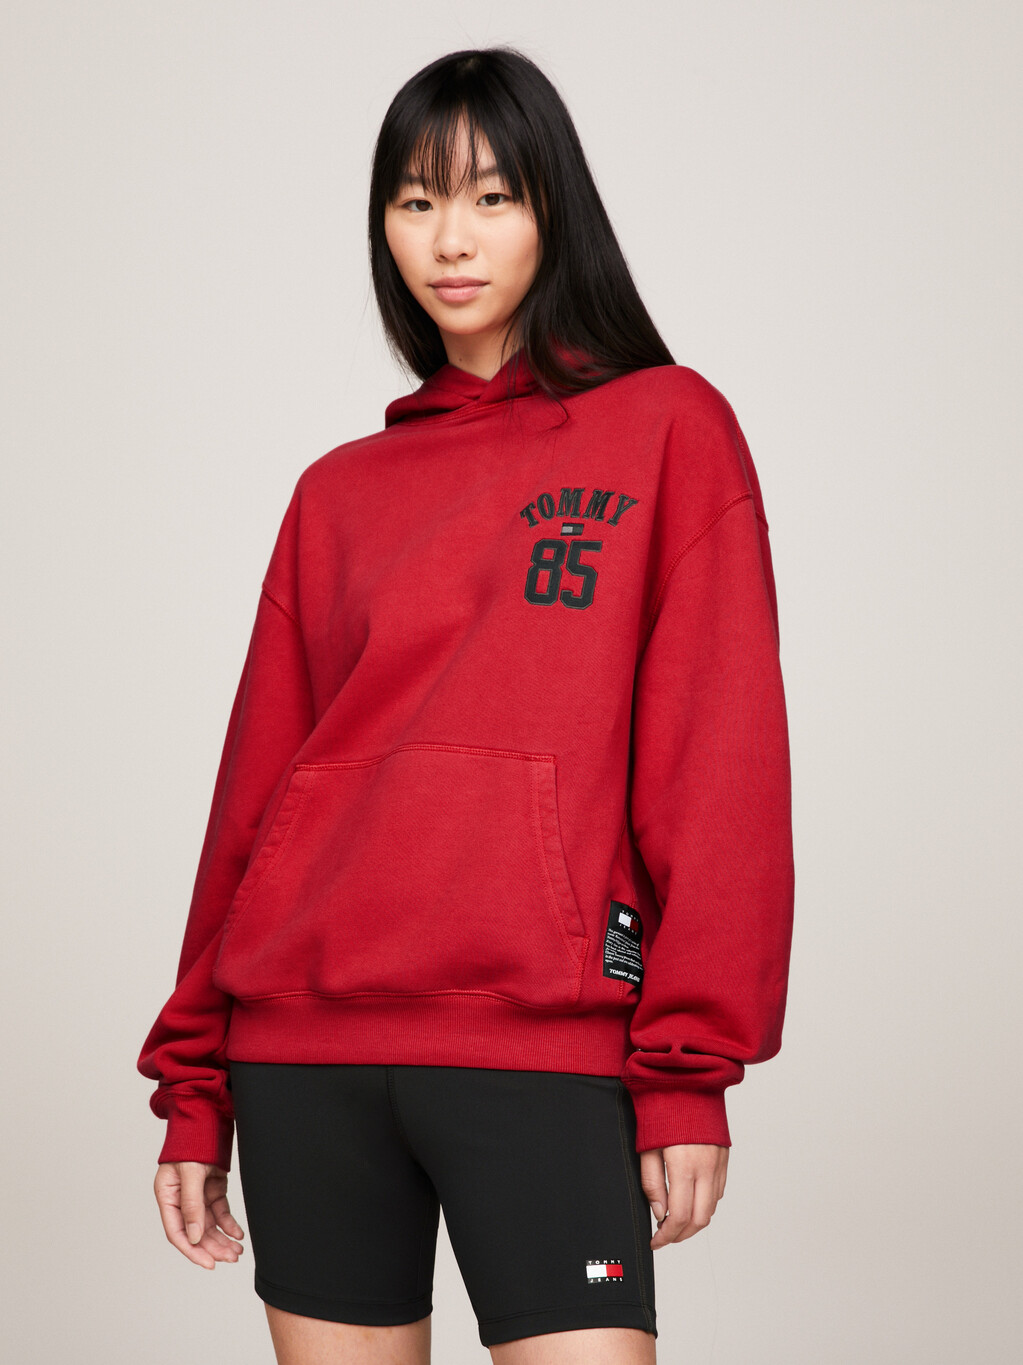 Tommy Remastered Dual Gender 1985 Collection Hoody, Medium Red, hi-res